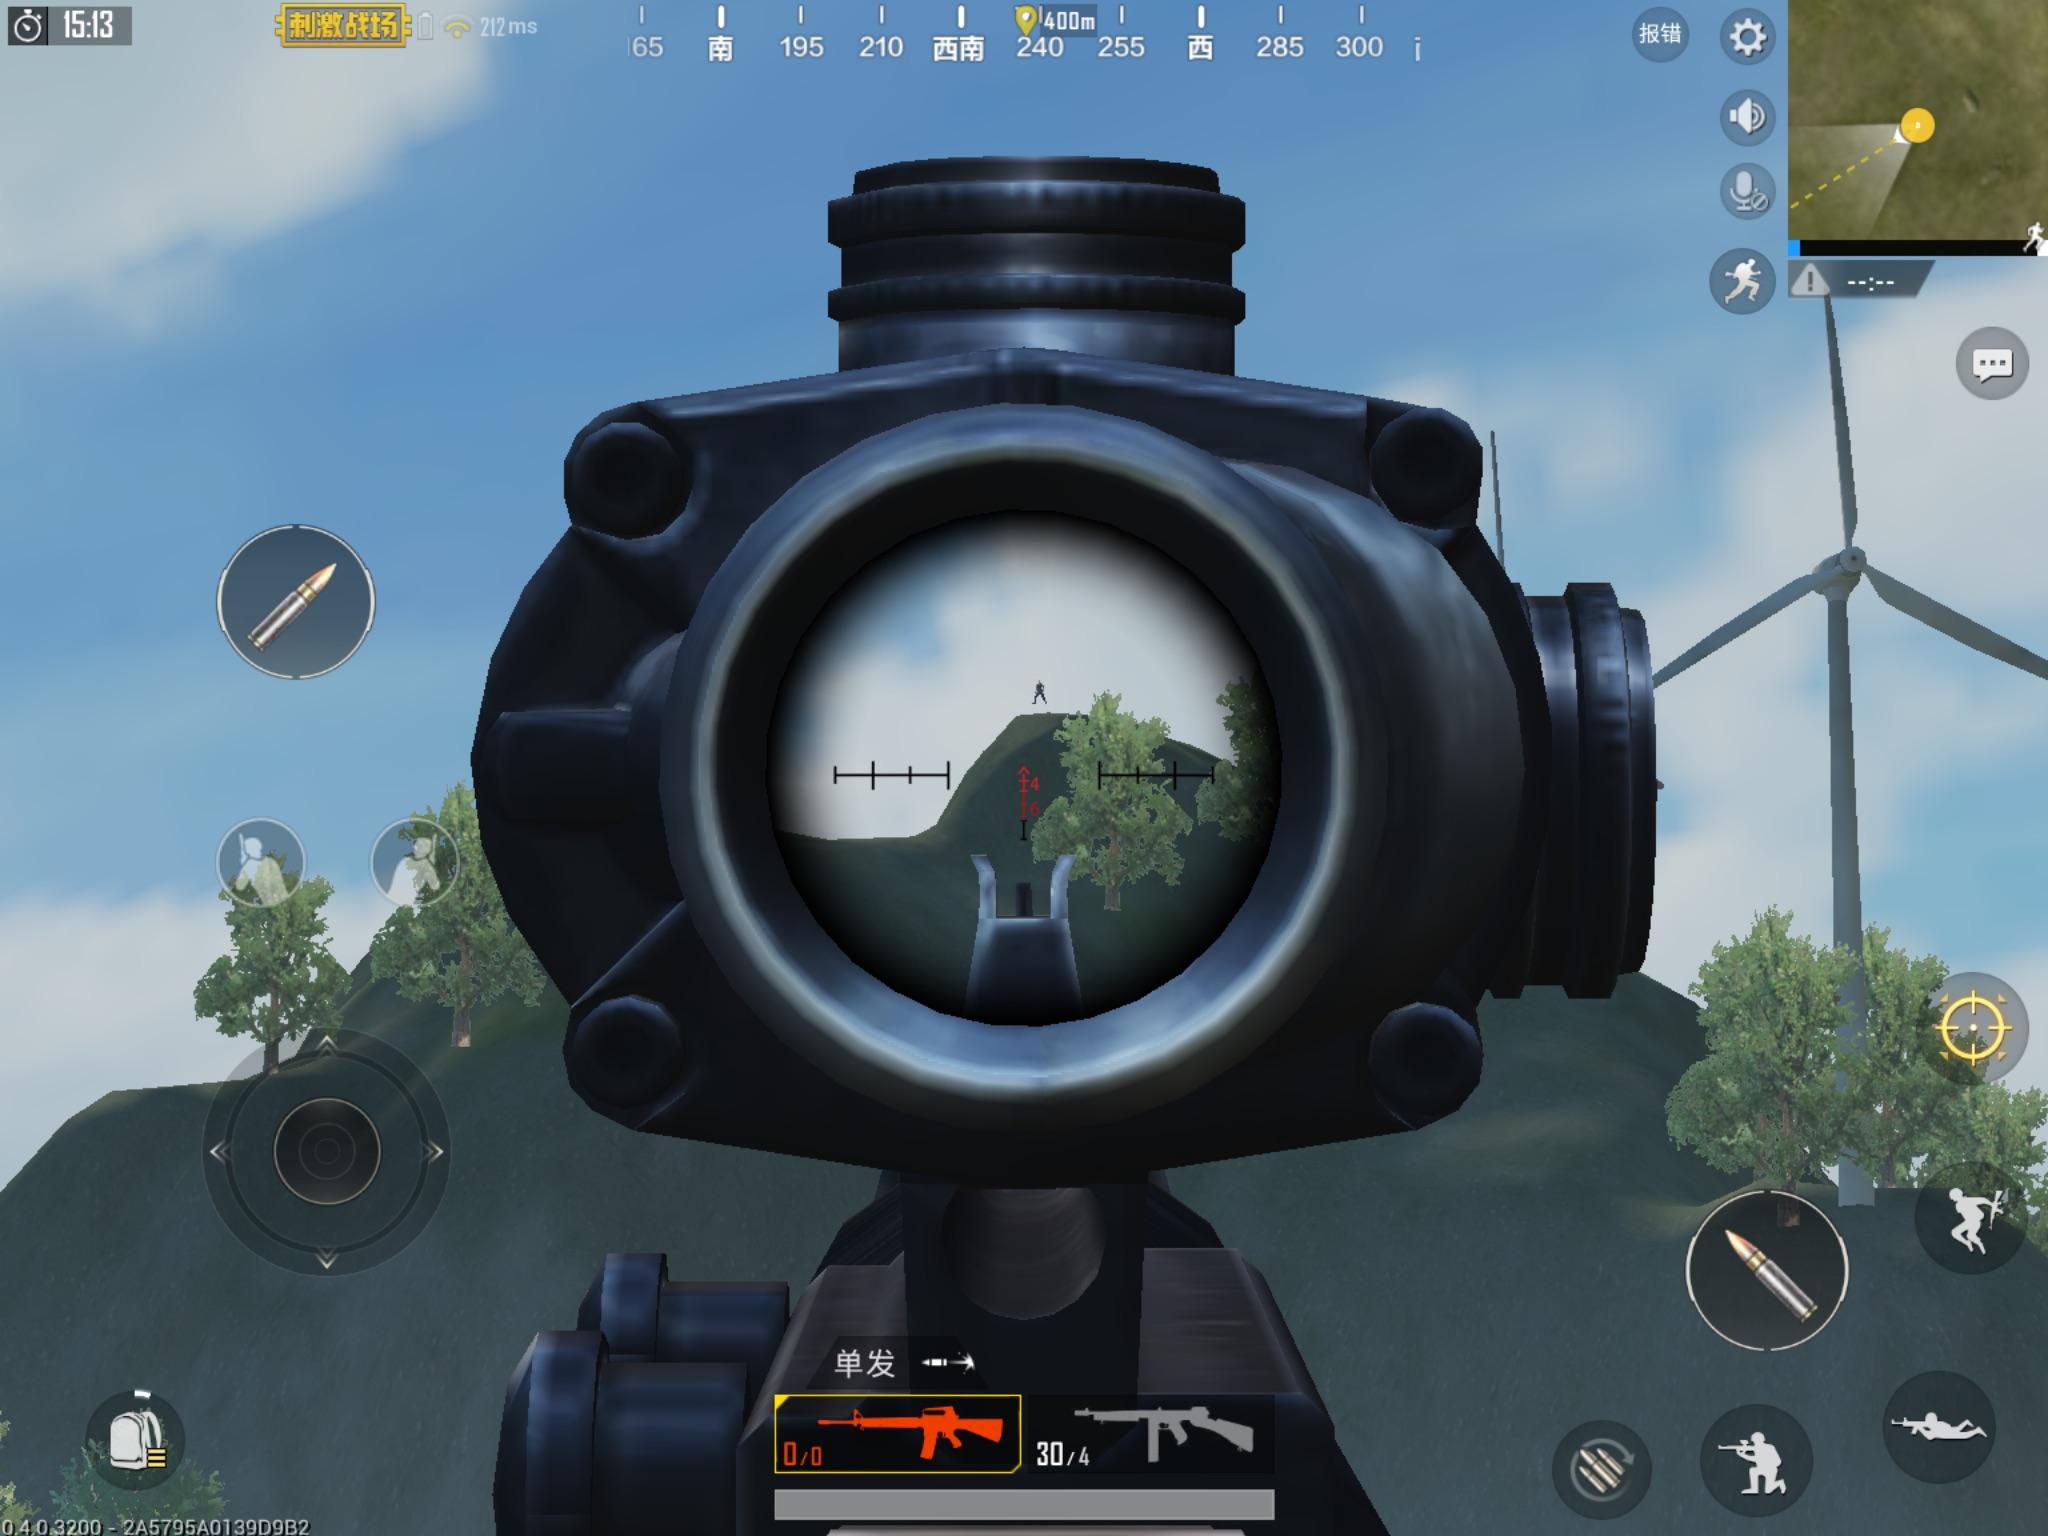 PUBG Mobile rendering distance is only 400 meters. I tested this